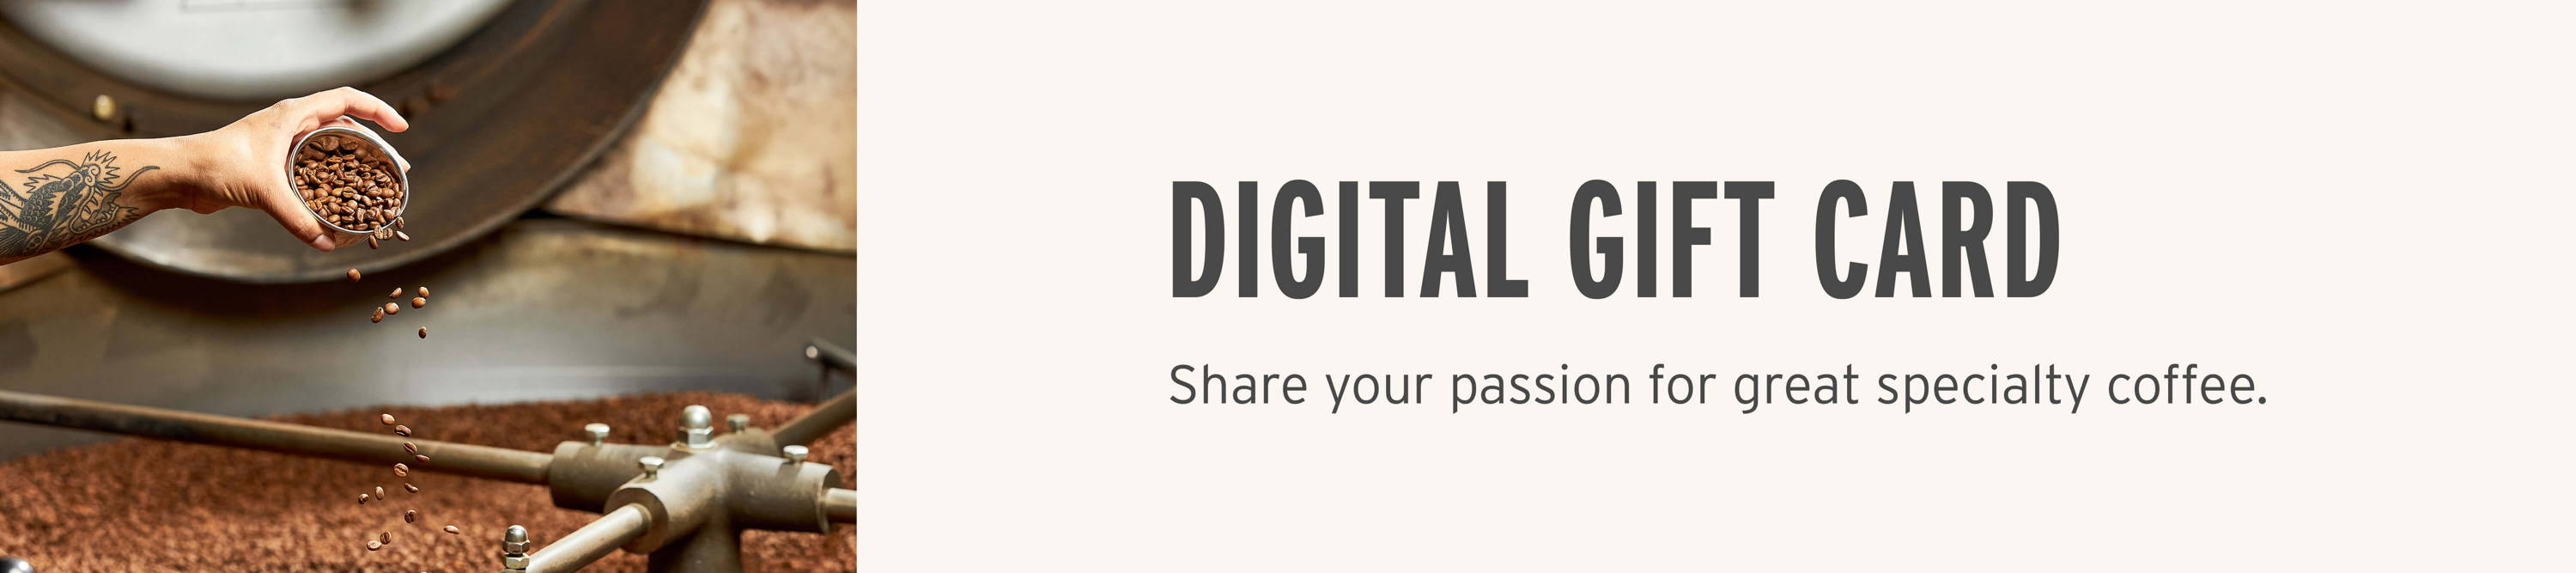 Digital Gift Card. Share you passion for great specialty coffee.